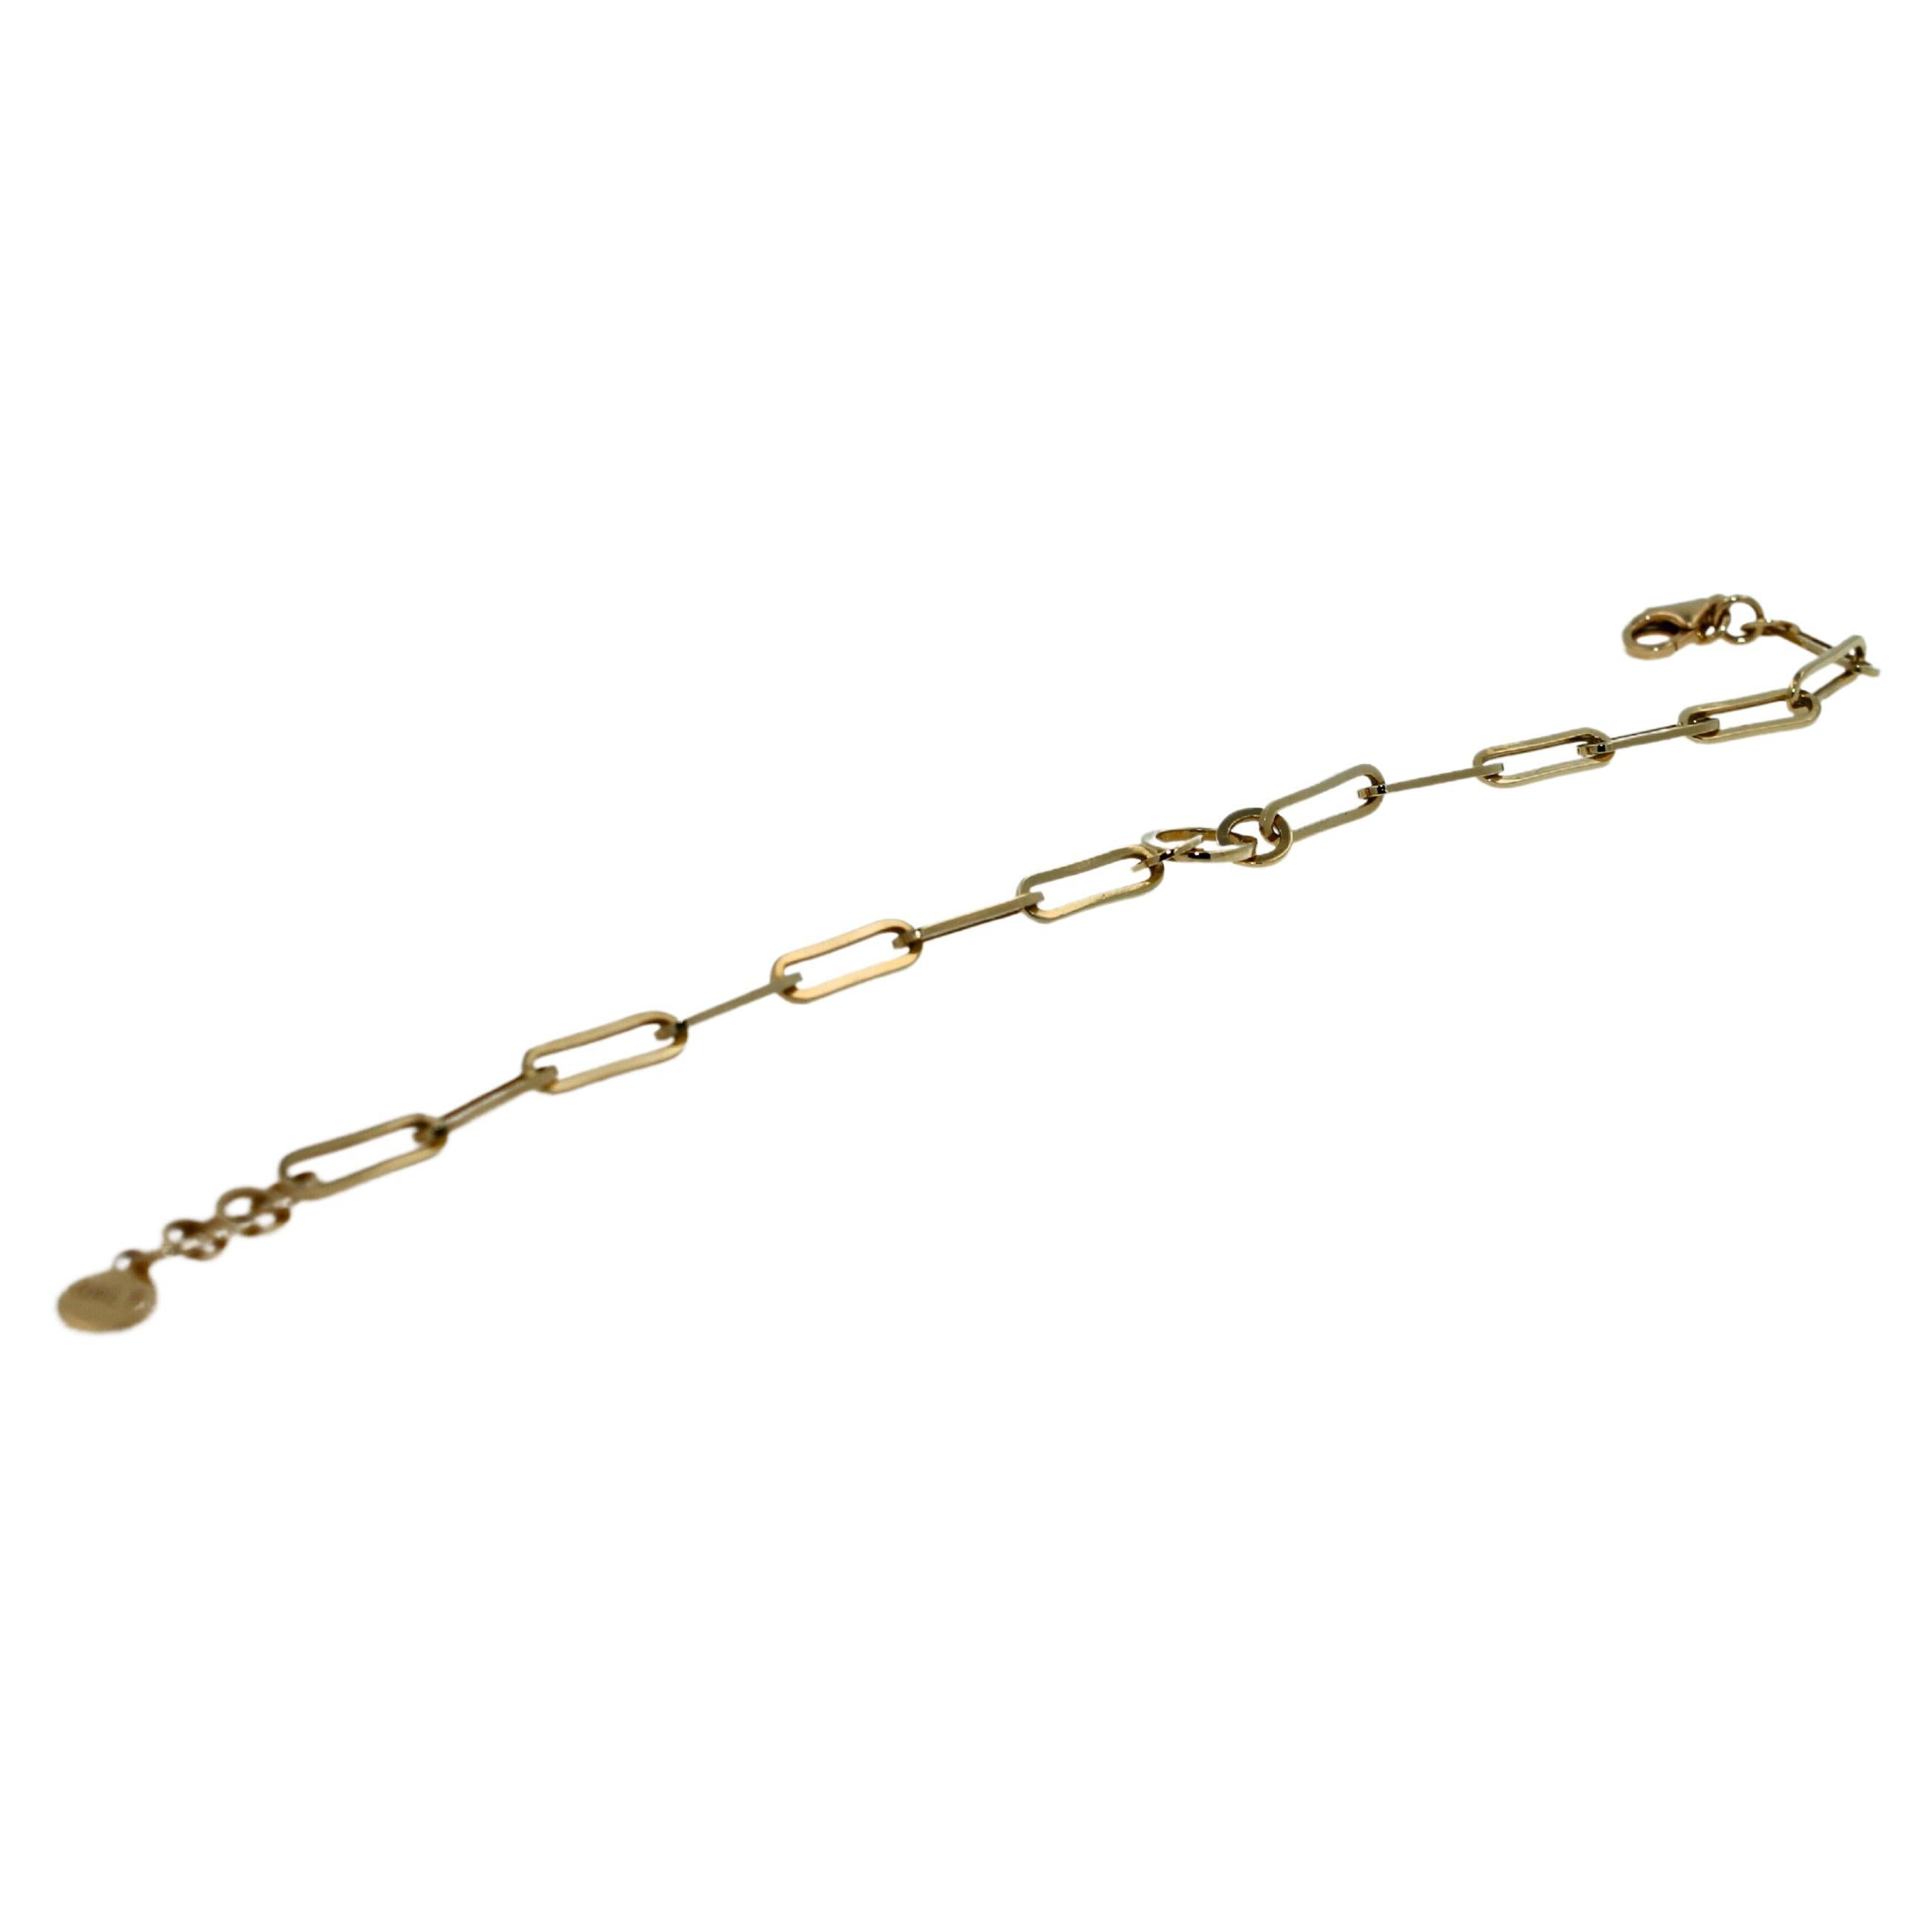 18K Yellow Gold
Charms and Pendants can be attached to the center + side + any links in this bracelet 
Great For Layering
Great Value
Length 7.5 Inches (Adjustable Links)